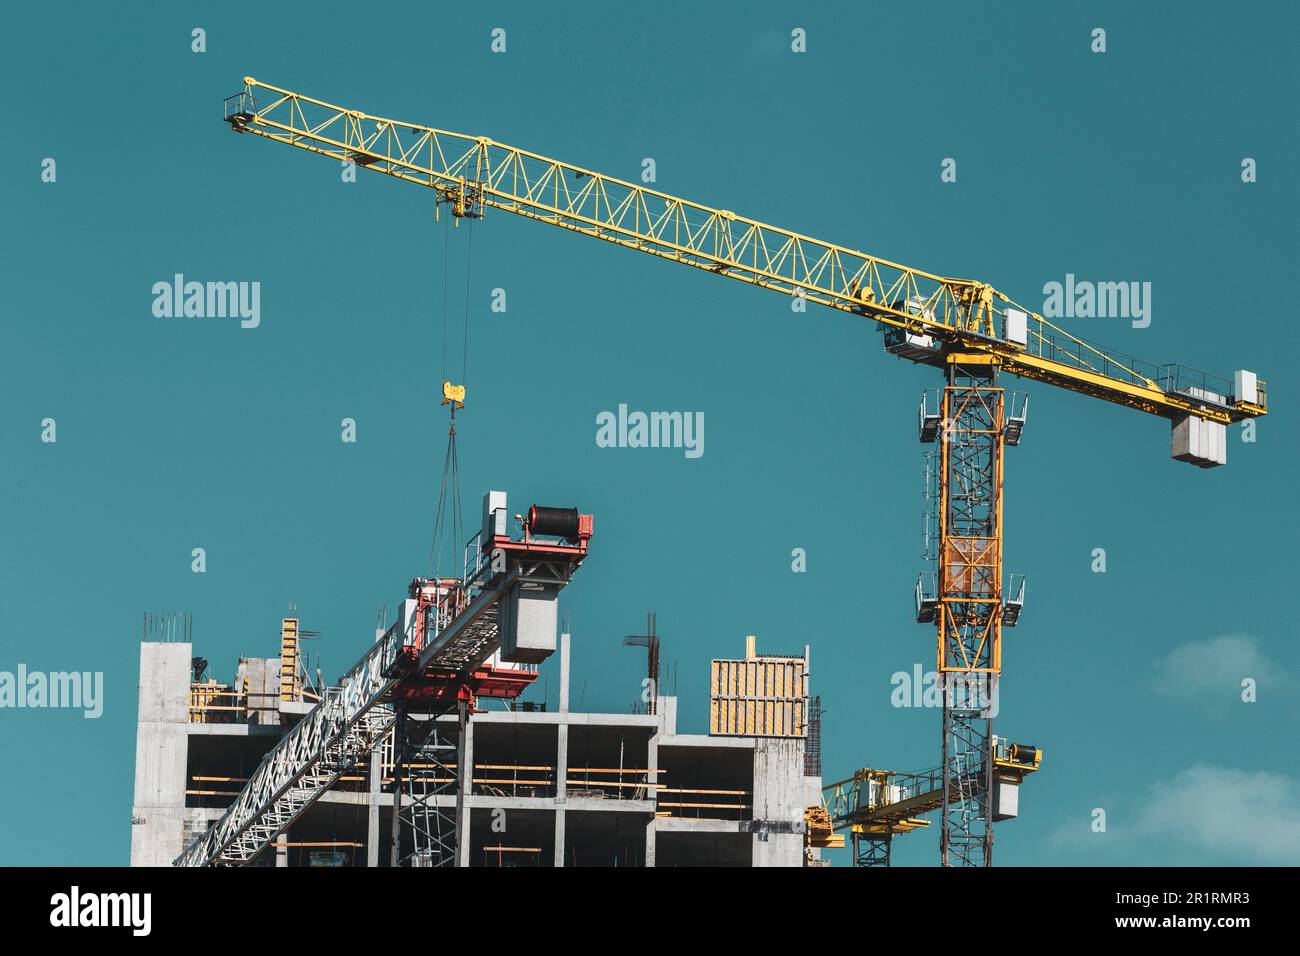 Amazing Bright Blue Clear Sky Above Construction Crane. Construction And Development Of New Multi-storey Residential Building. Conception Of Stock Photo